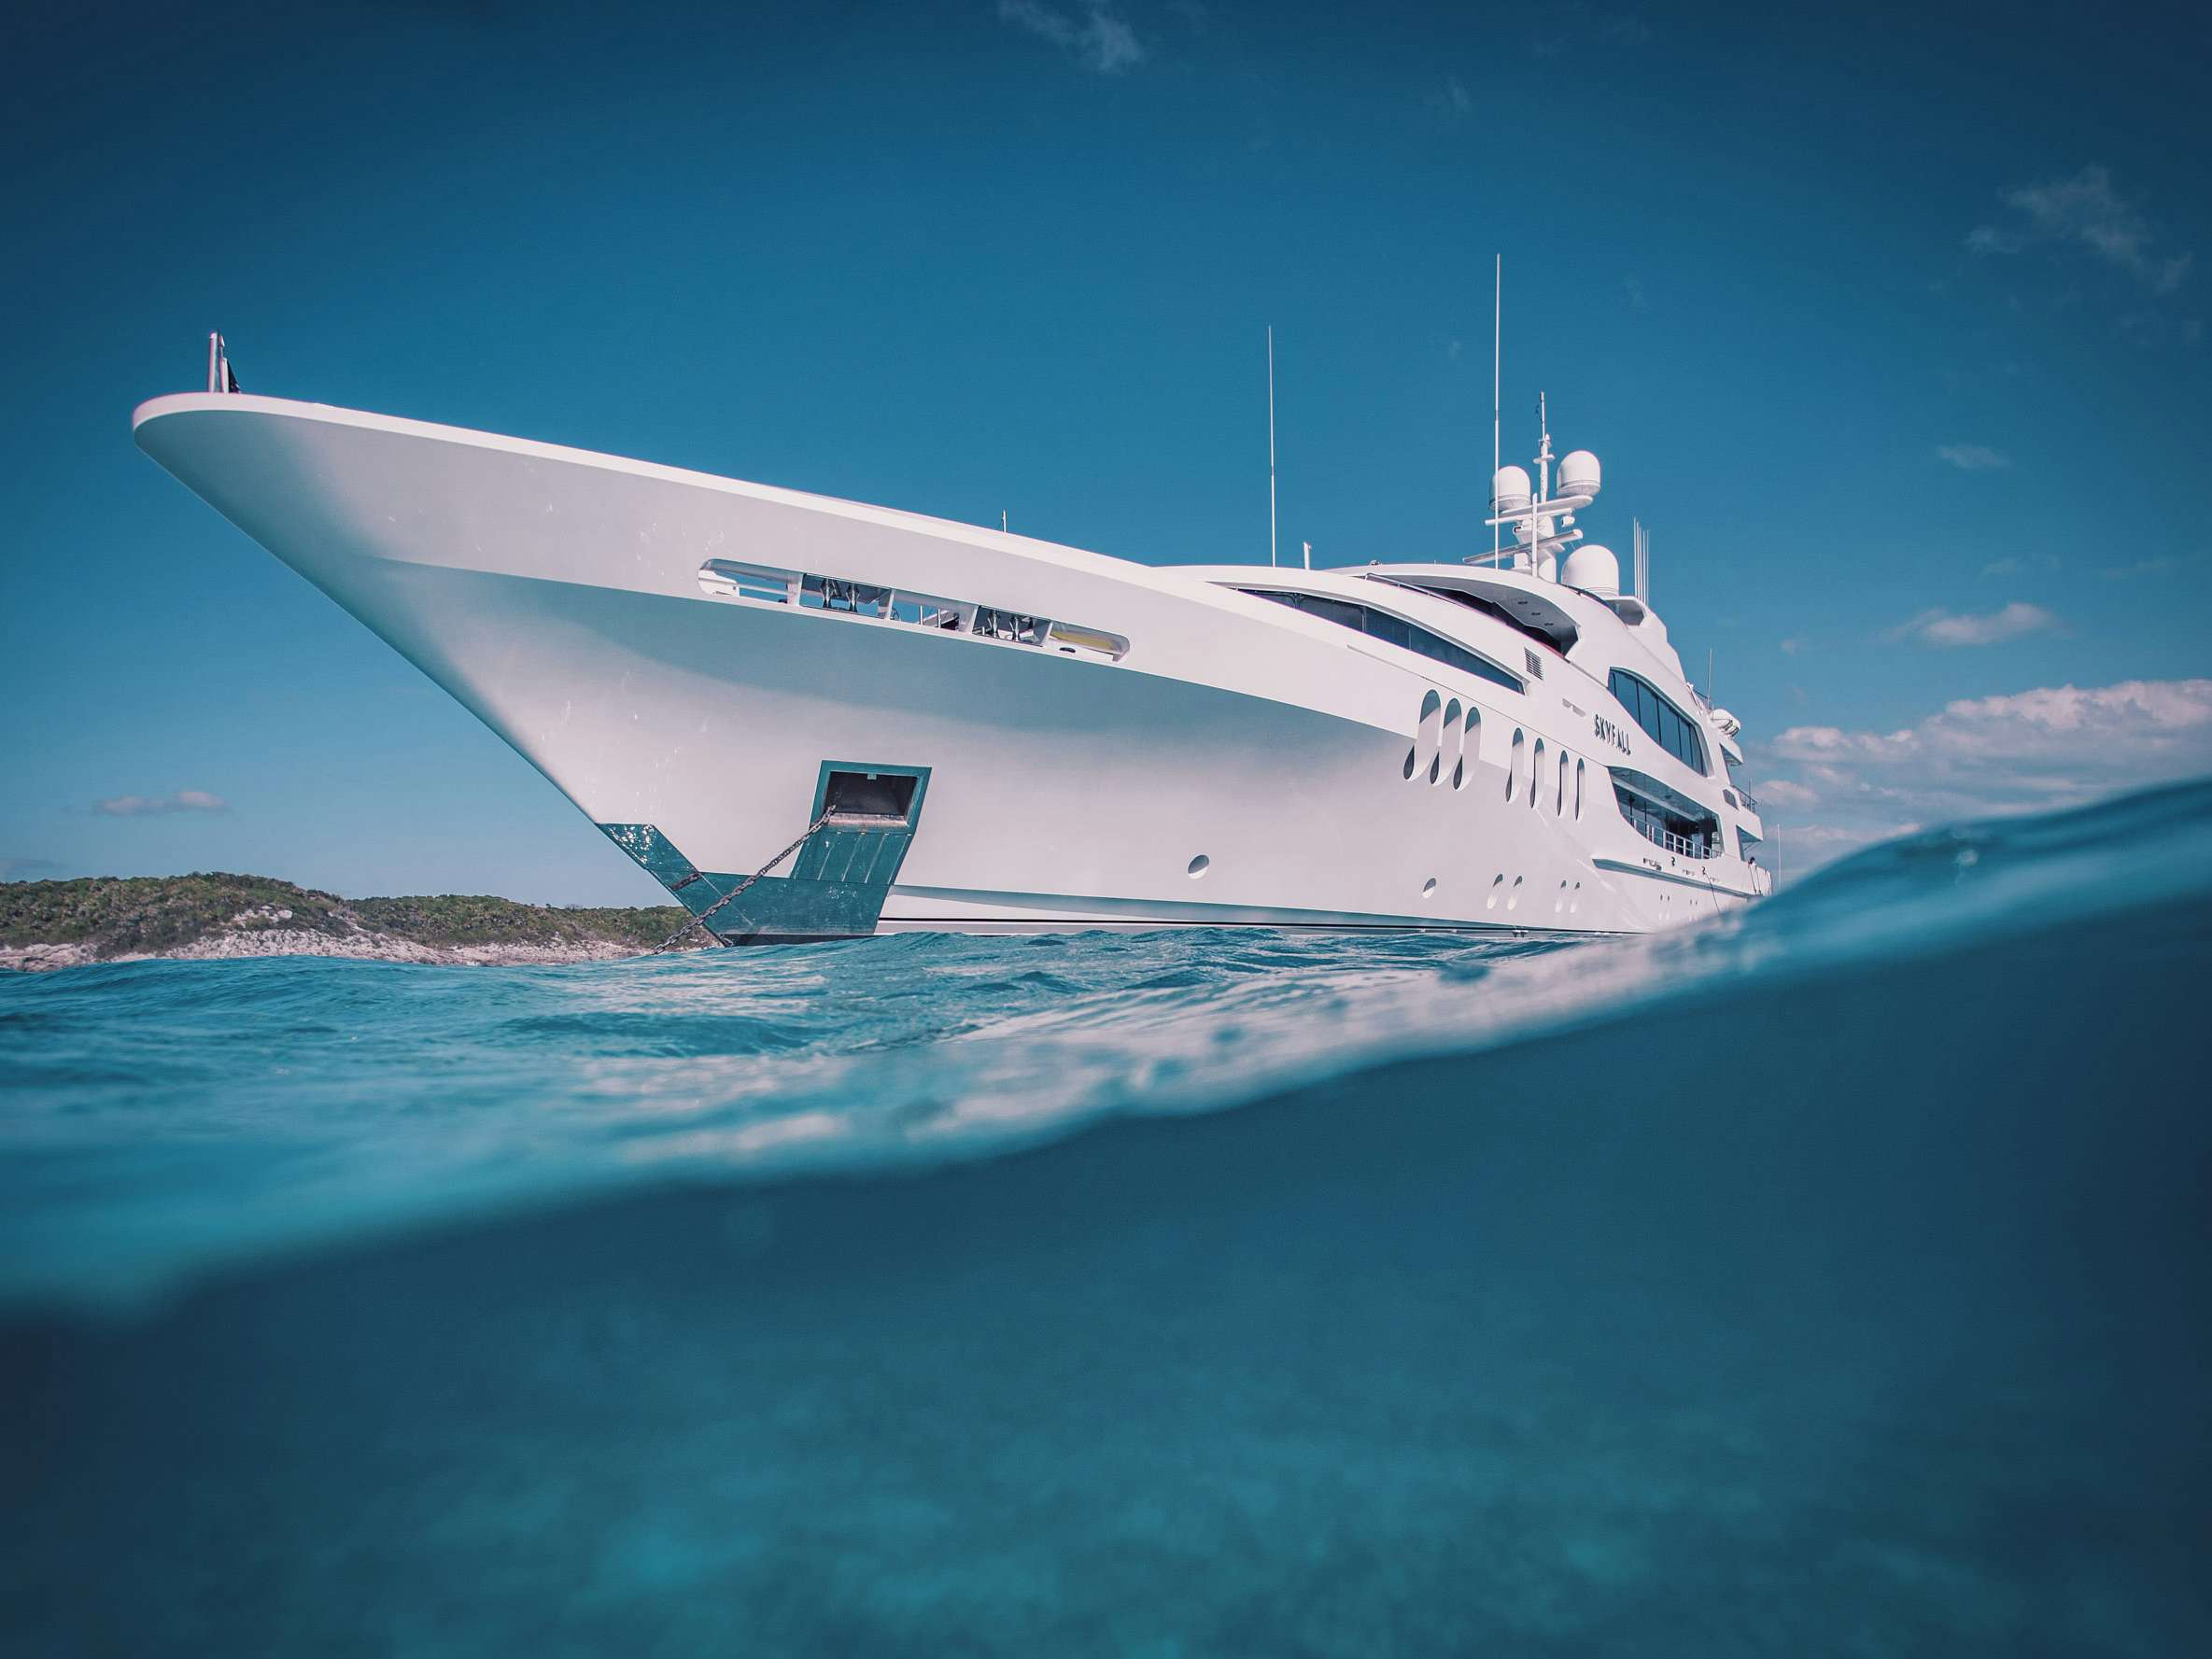 Yacht anchored at clear Caribbean waters